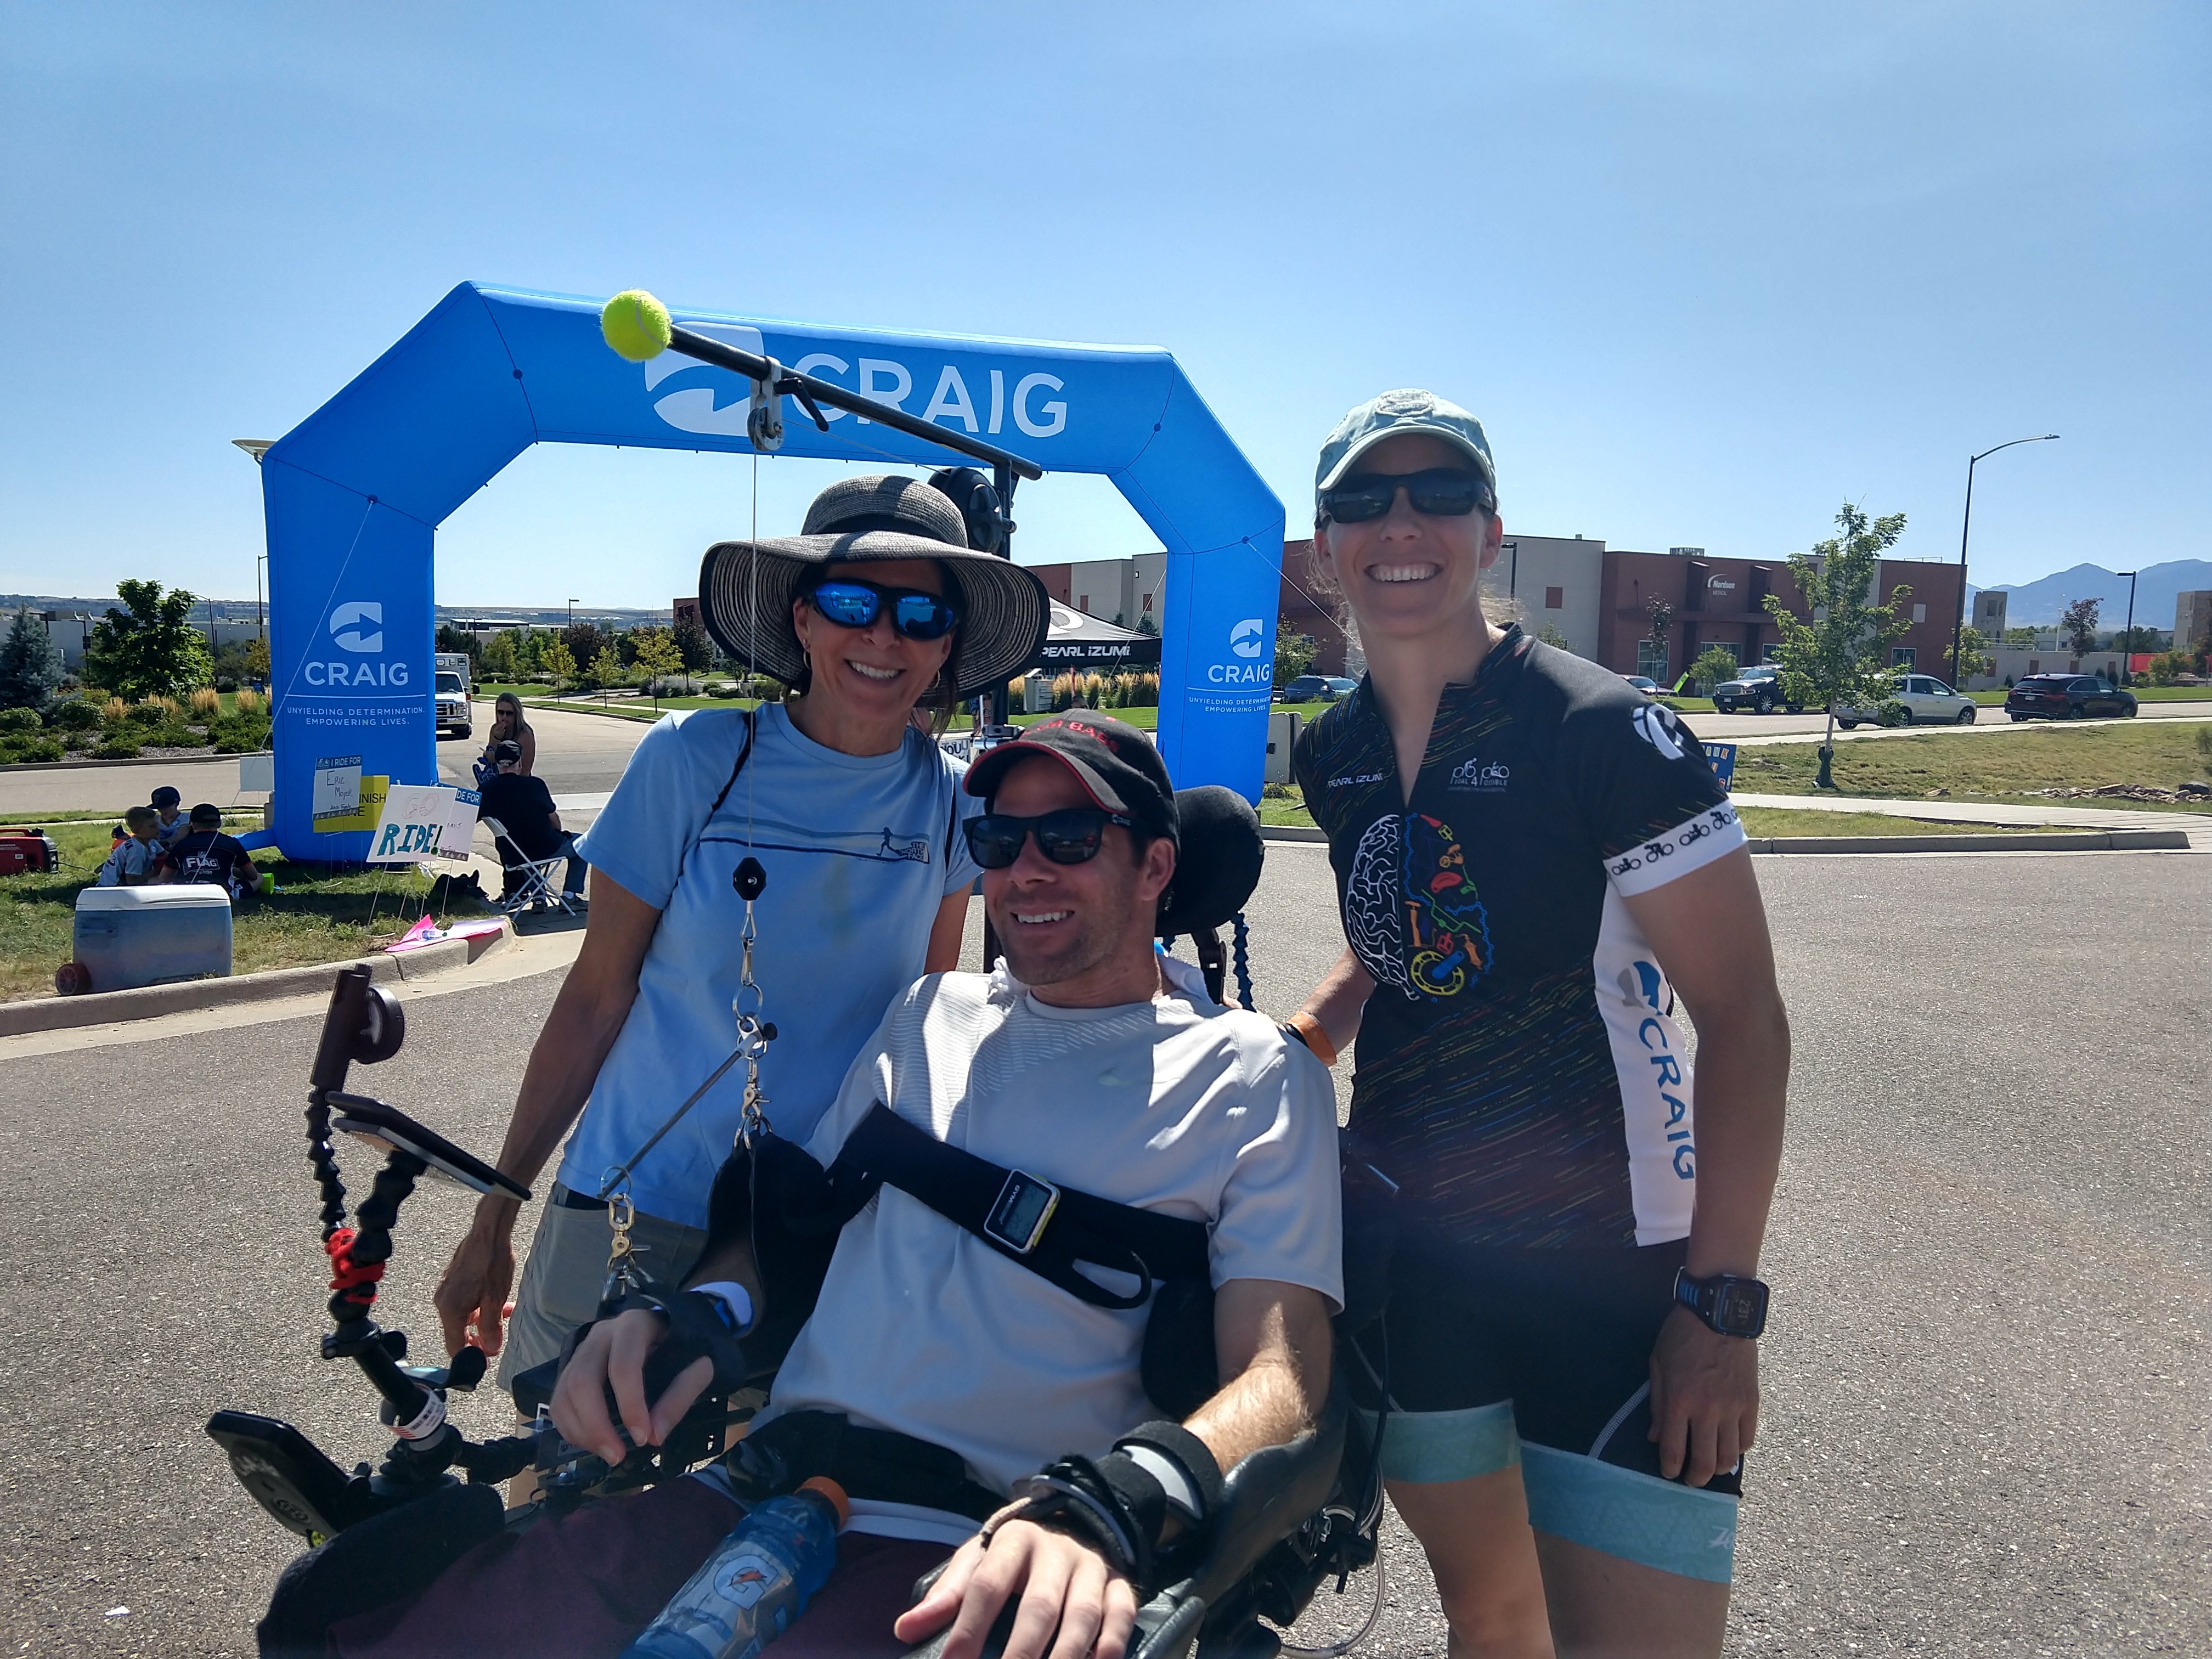 Two women, Audrey and her mom, smile in a family photo with her twin, Cory. Cory is in an electronic wheel chair. They stand in front of a bike race finish line-Audrey is in bike racing attire.